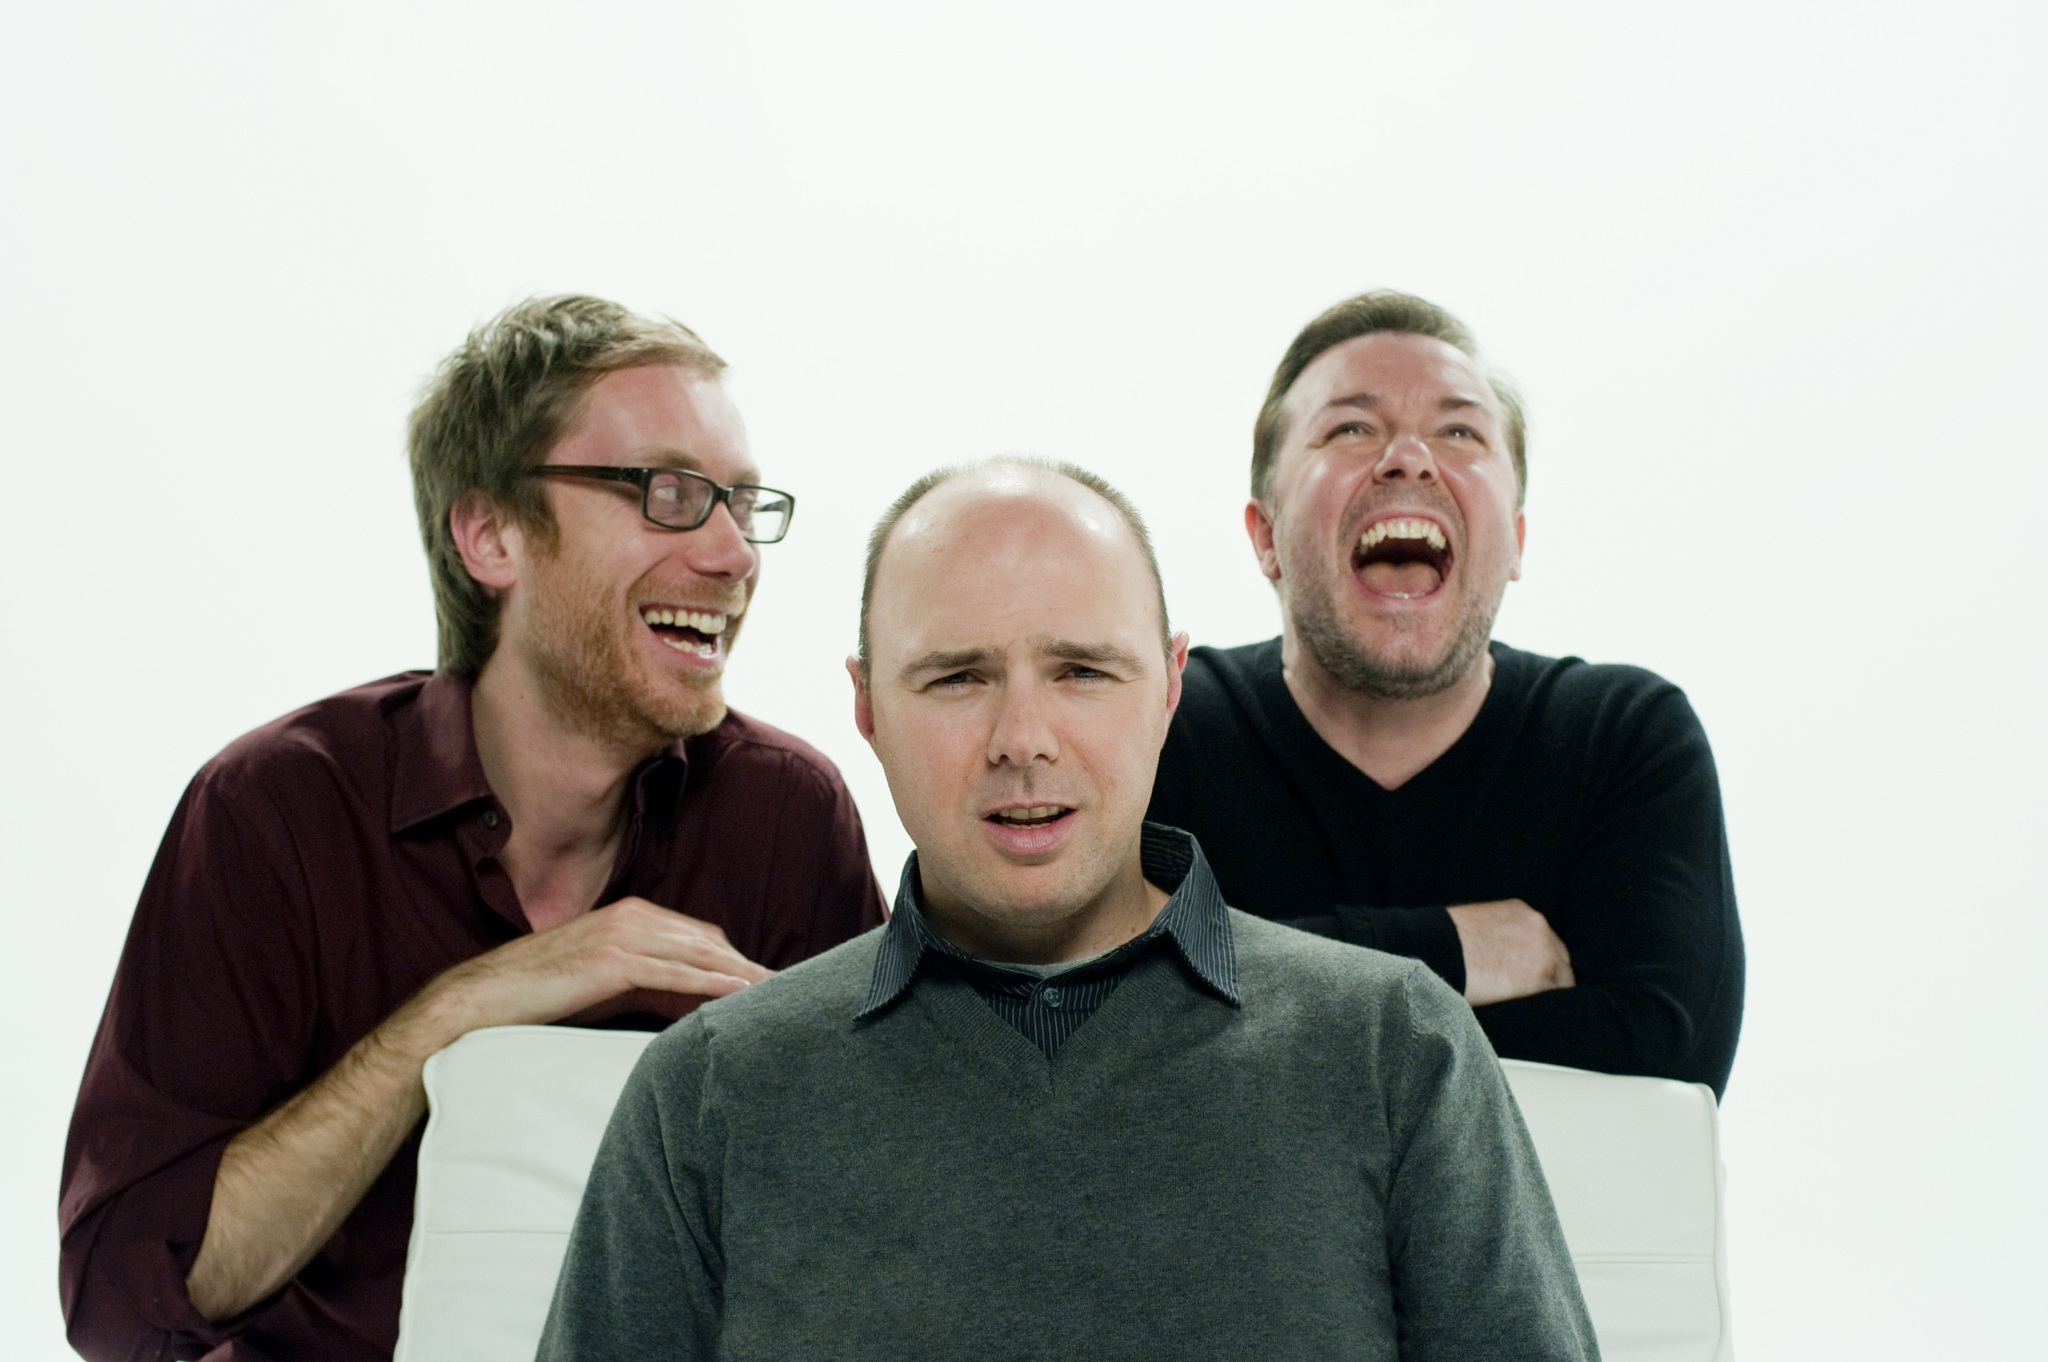 Still of Ricky Gervais, Stephen Merchant and Karl Pilkington in The Ricky Gervais Show (2010)